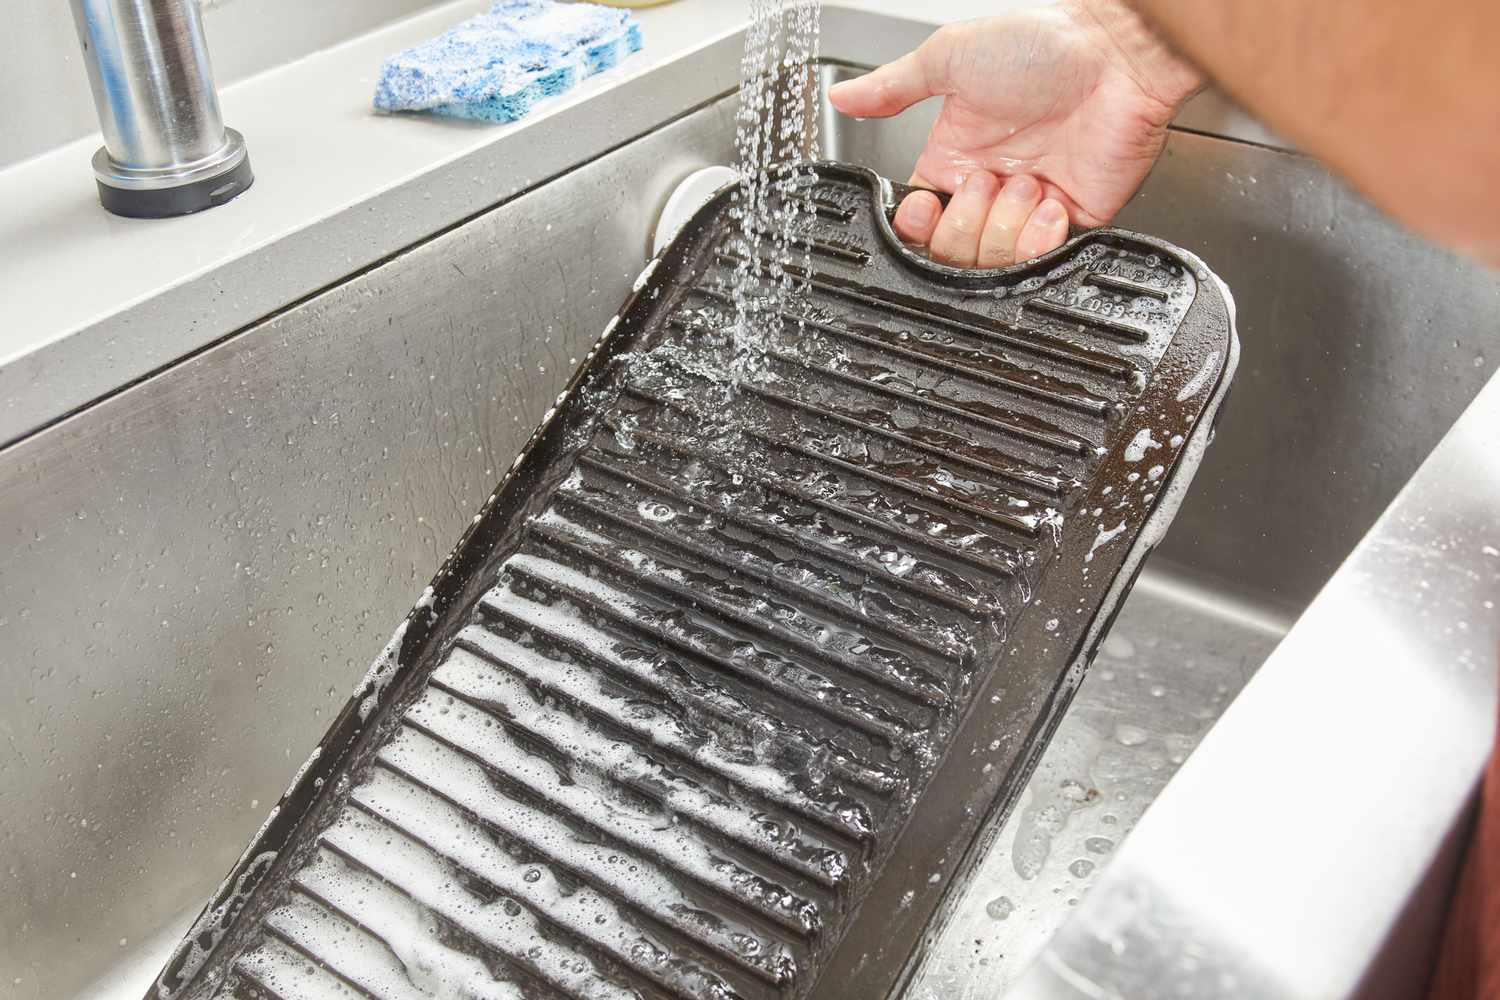 A person washing the Lodge Cast Iron Reversible Grill/Griddle with soap and water.